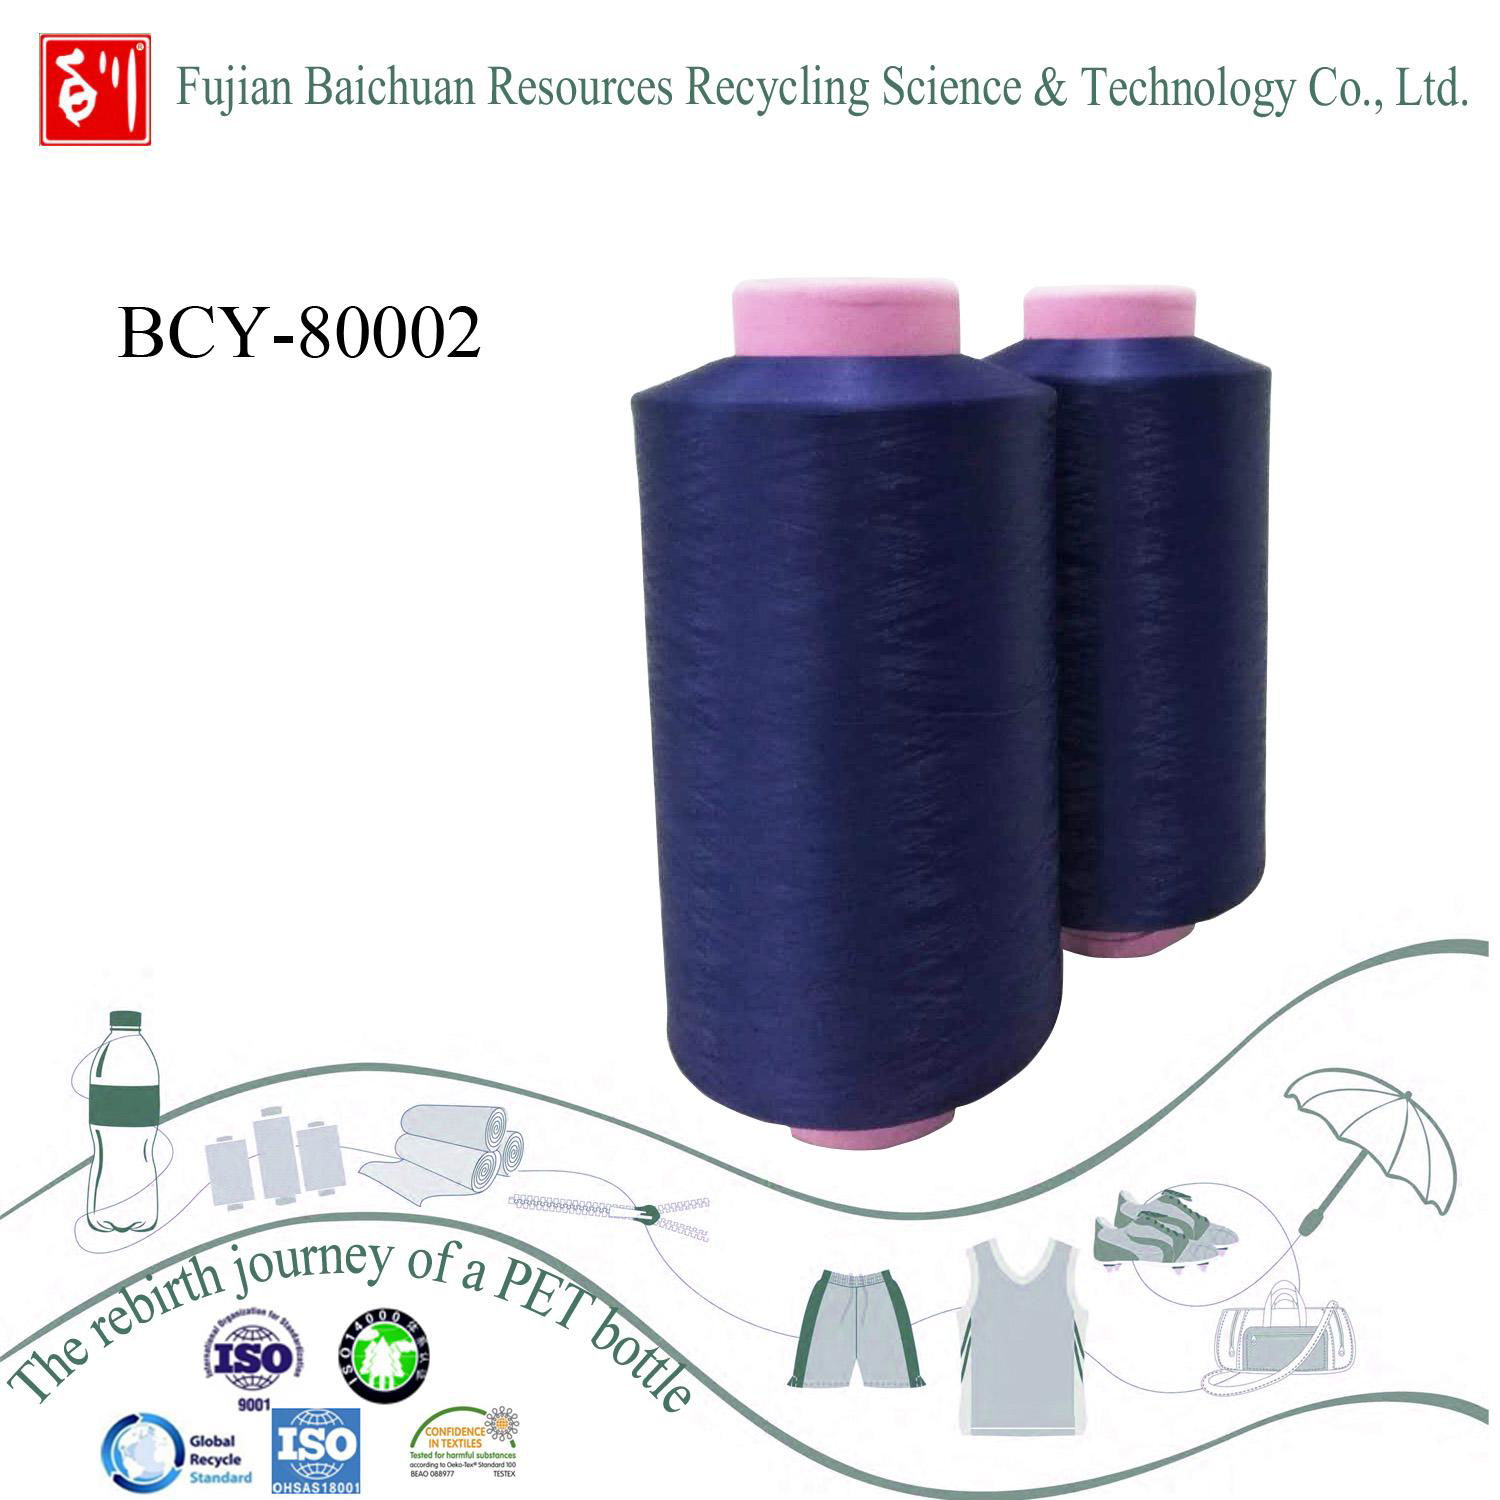 New Recycled yarn with Environment-friendly material